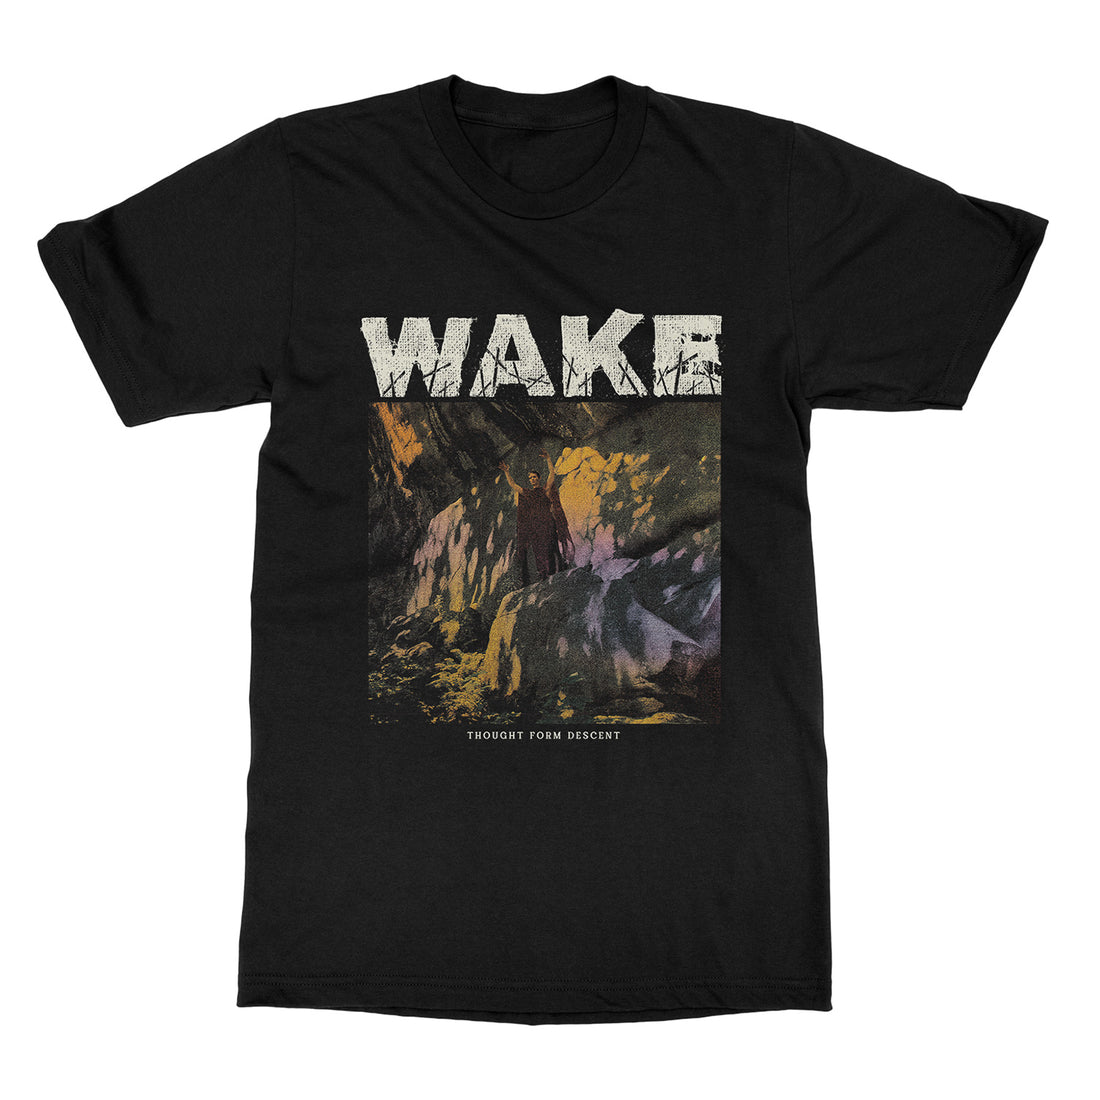 wake-thought-form-descent-t-shirt